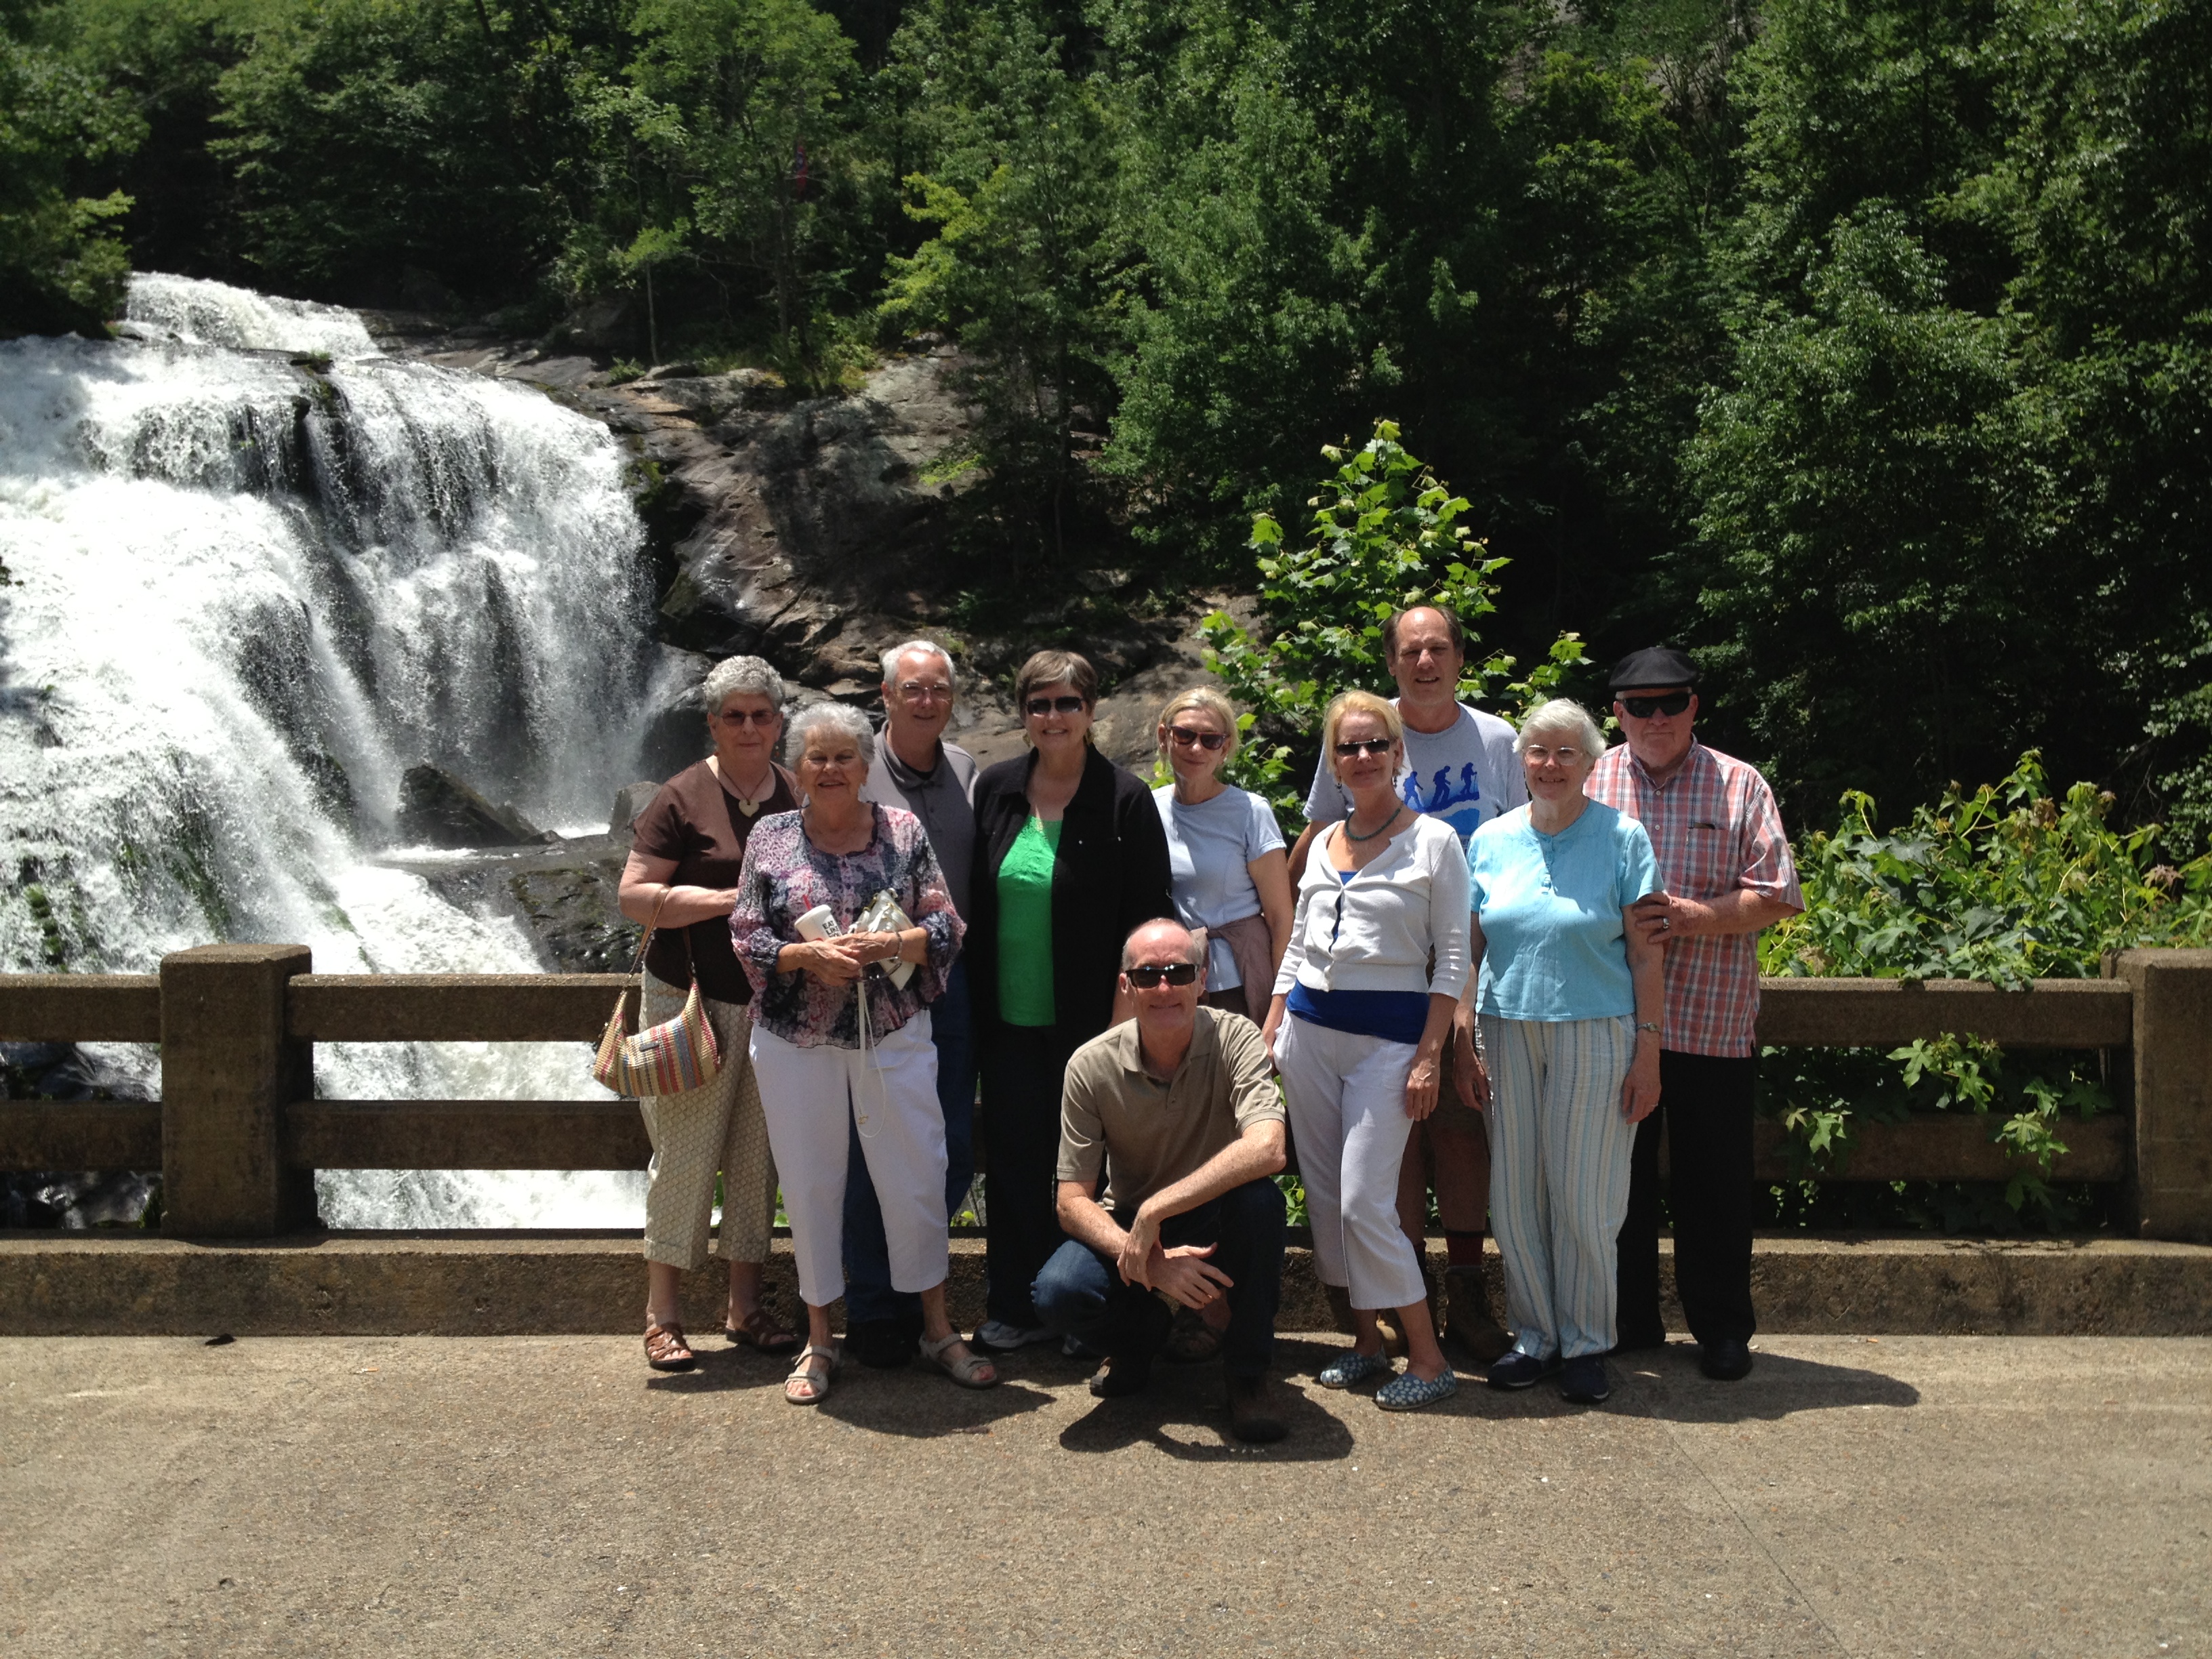 2nd Presbyterian Church goes on a summer outing to Bald River Falls